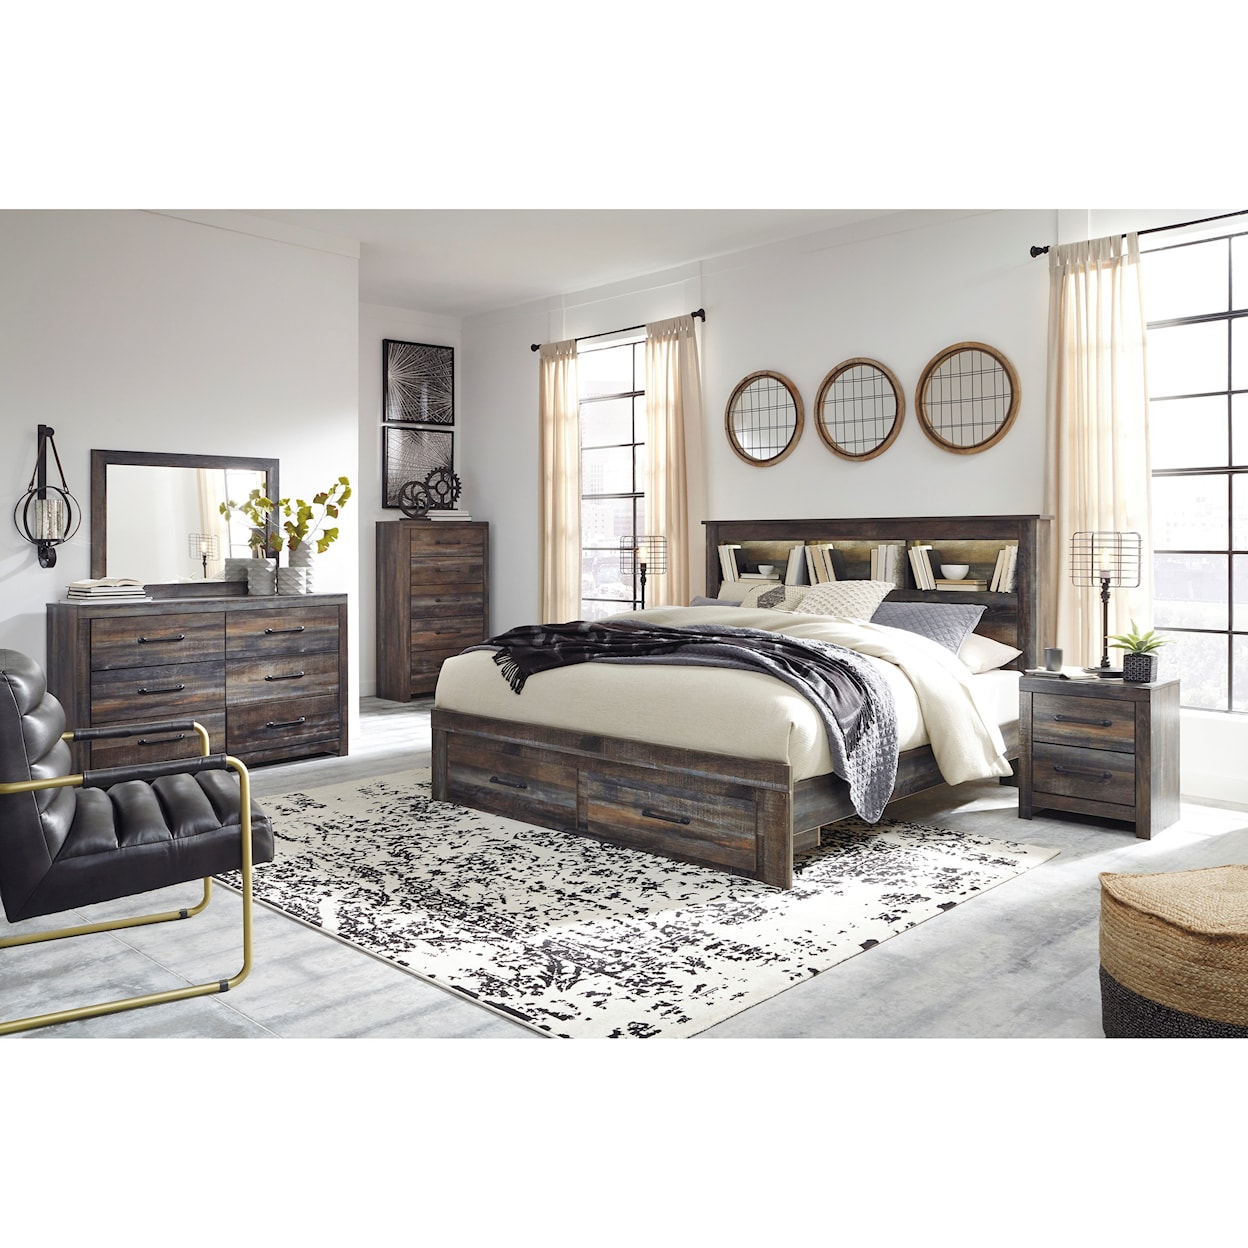 Signature Design by Ashley Drystan 7PC King Bedroom Group